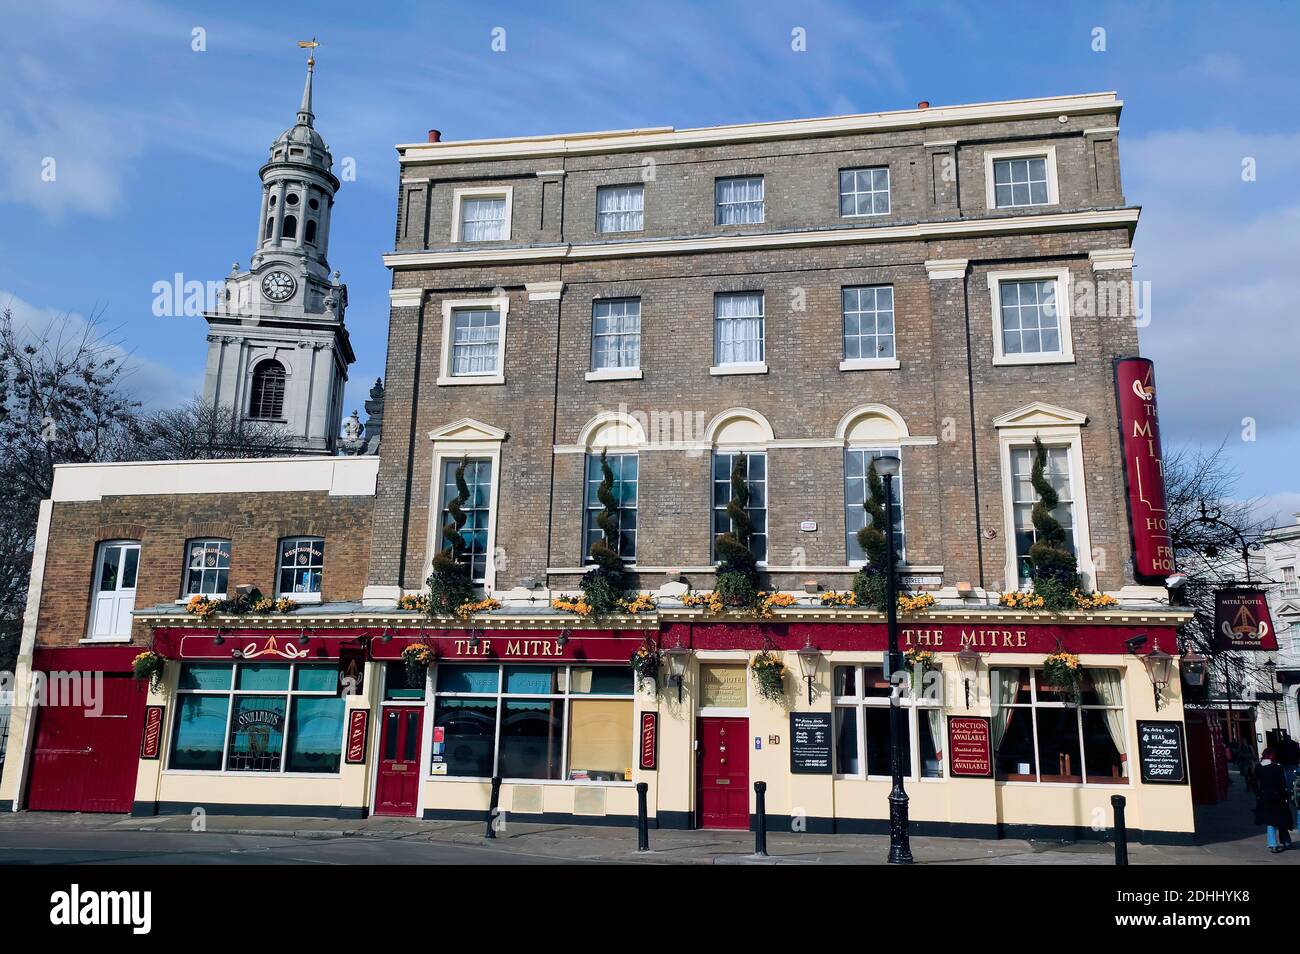 The Mitre Hotel, Greenwich, London Stock Photo